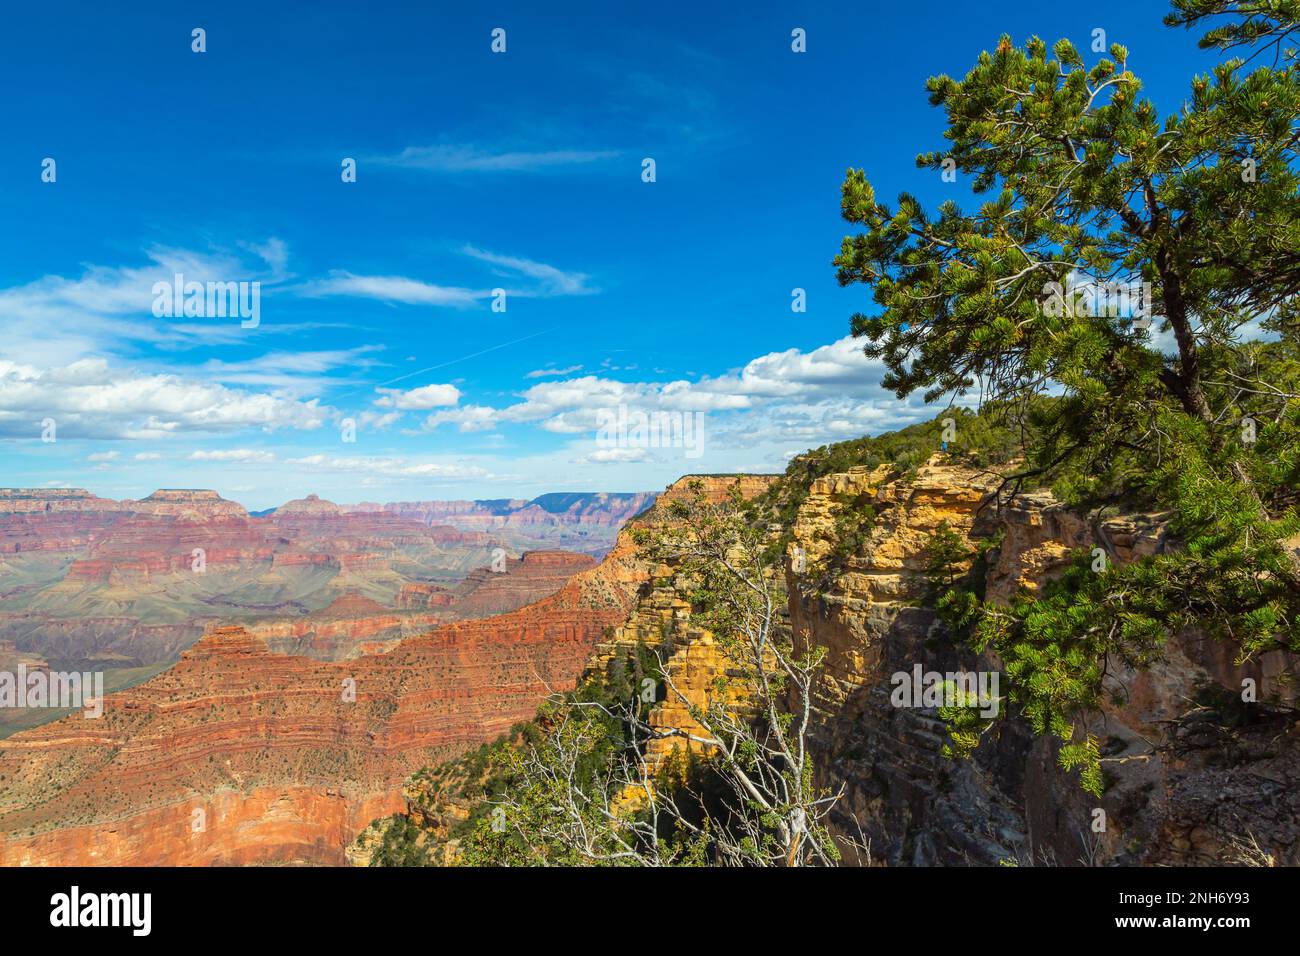 Grand Canyon in Arizona, USA. Skyline of Grand Canyon National Park. Panorama in beautiful nature landscape scenery at sunset in Grand Canyon National Park. Stock Photo